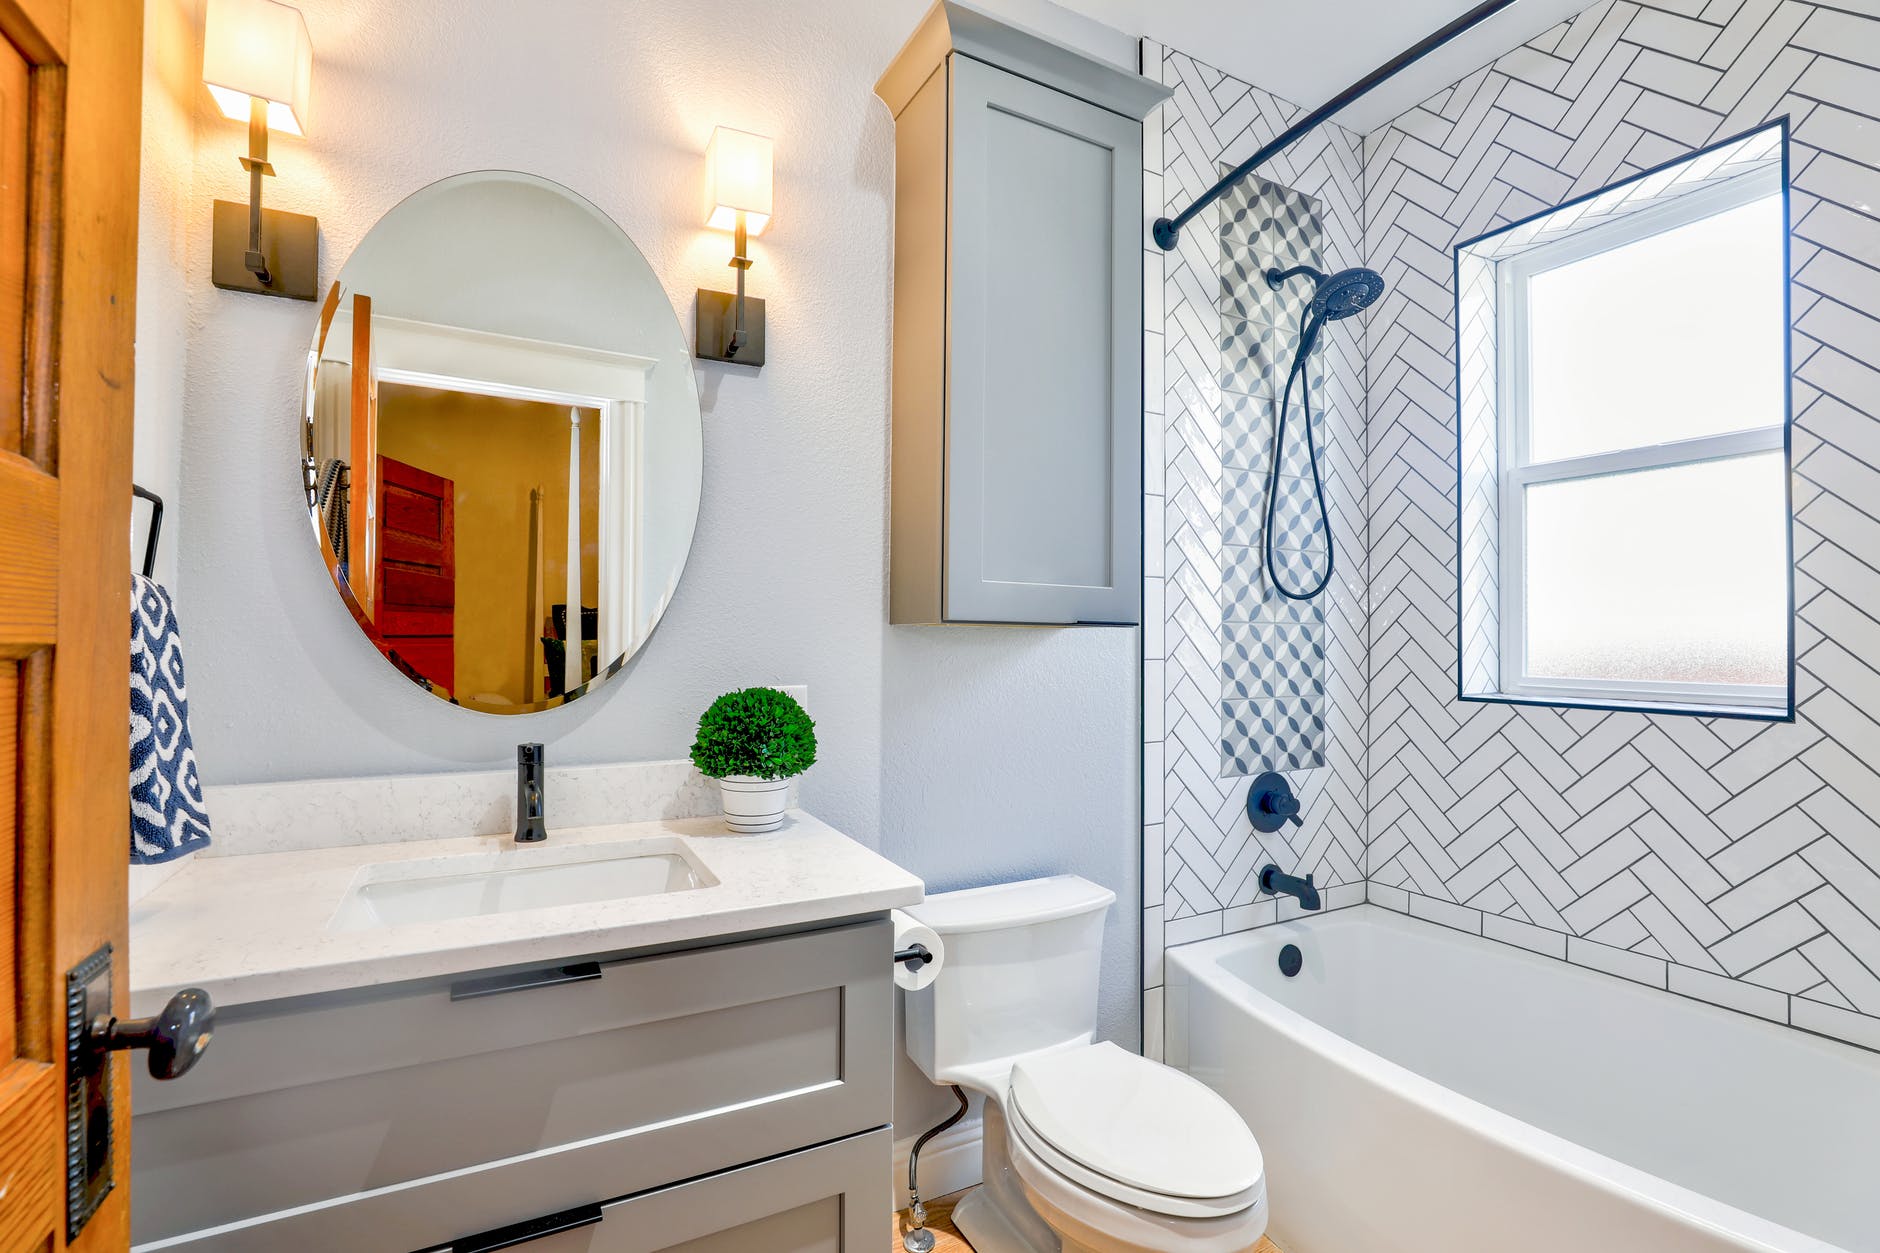 Property Management Tips - Inexpensive Bathroom Updates You Can Do Yourself